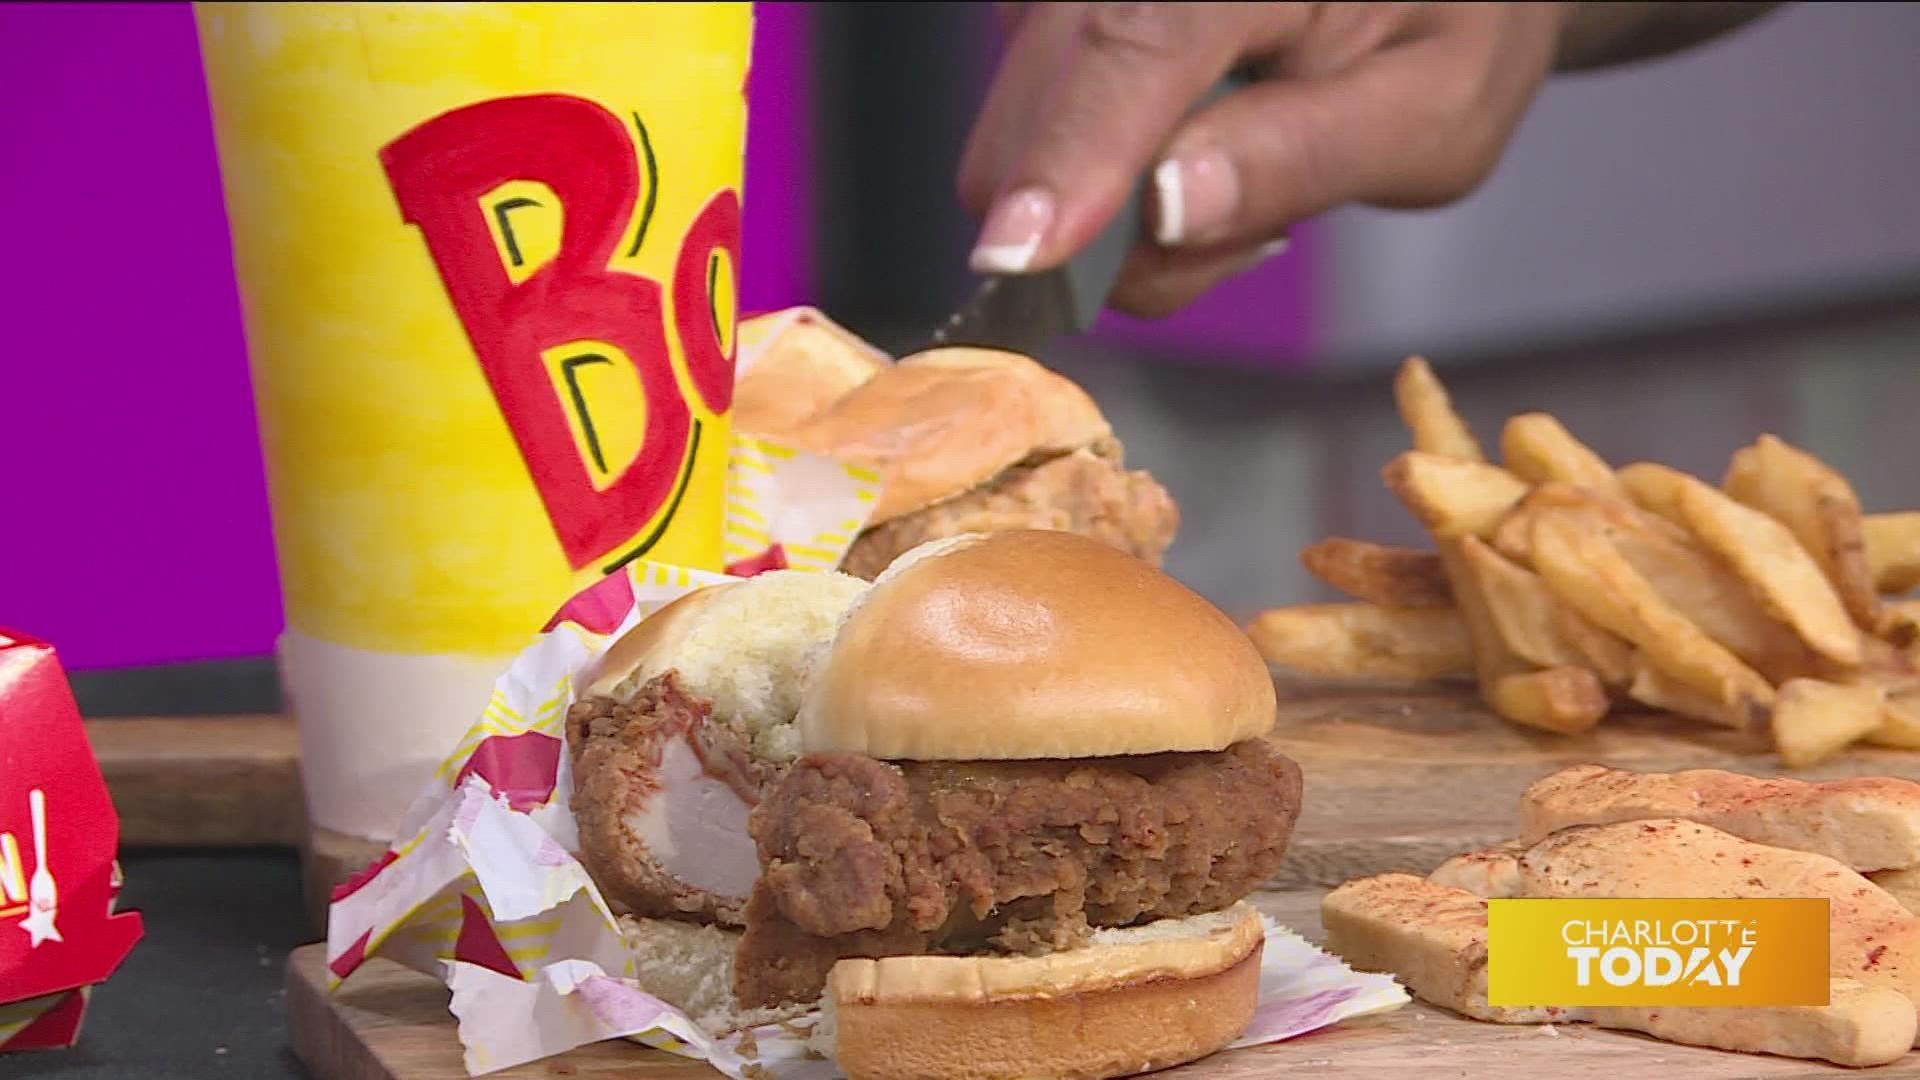 Netflix star Nina Charles helped celebrate with a cake version of the Bojangles chicken sandwich